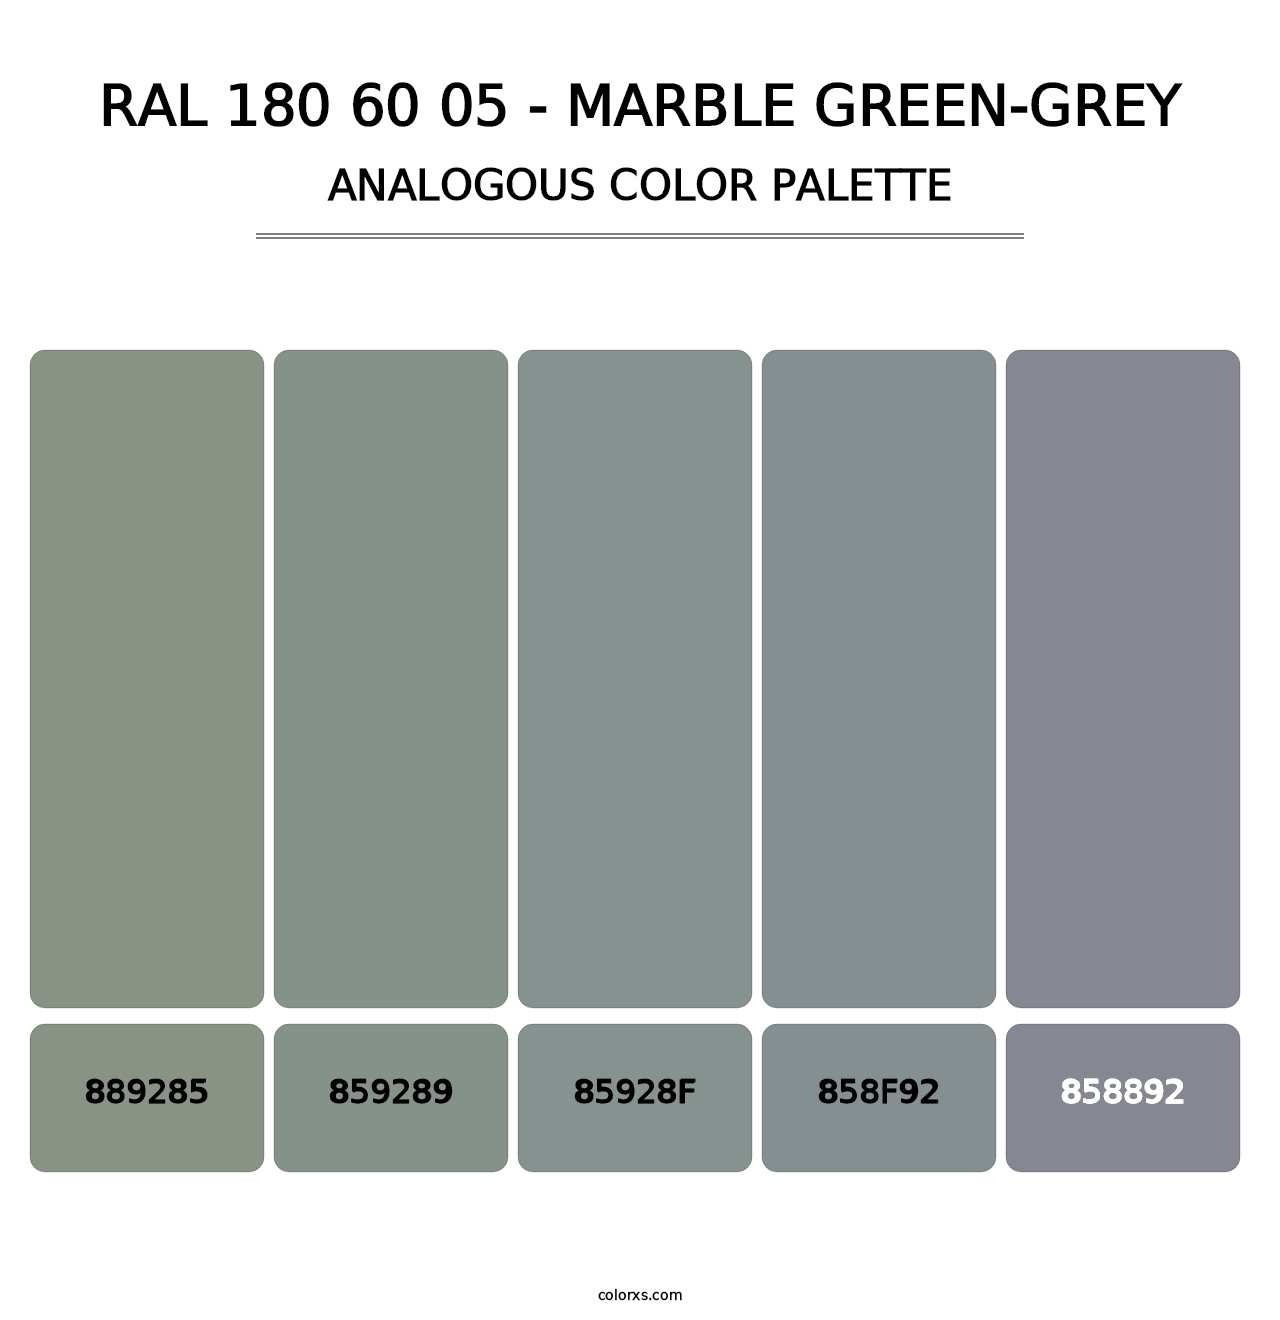 RAL 180 60 05 - Marble Green-Grey - Analogous Color Palette